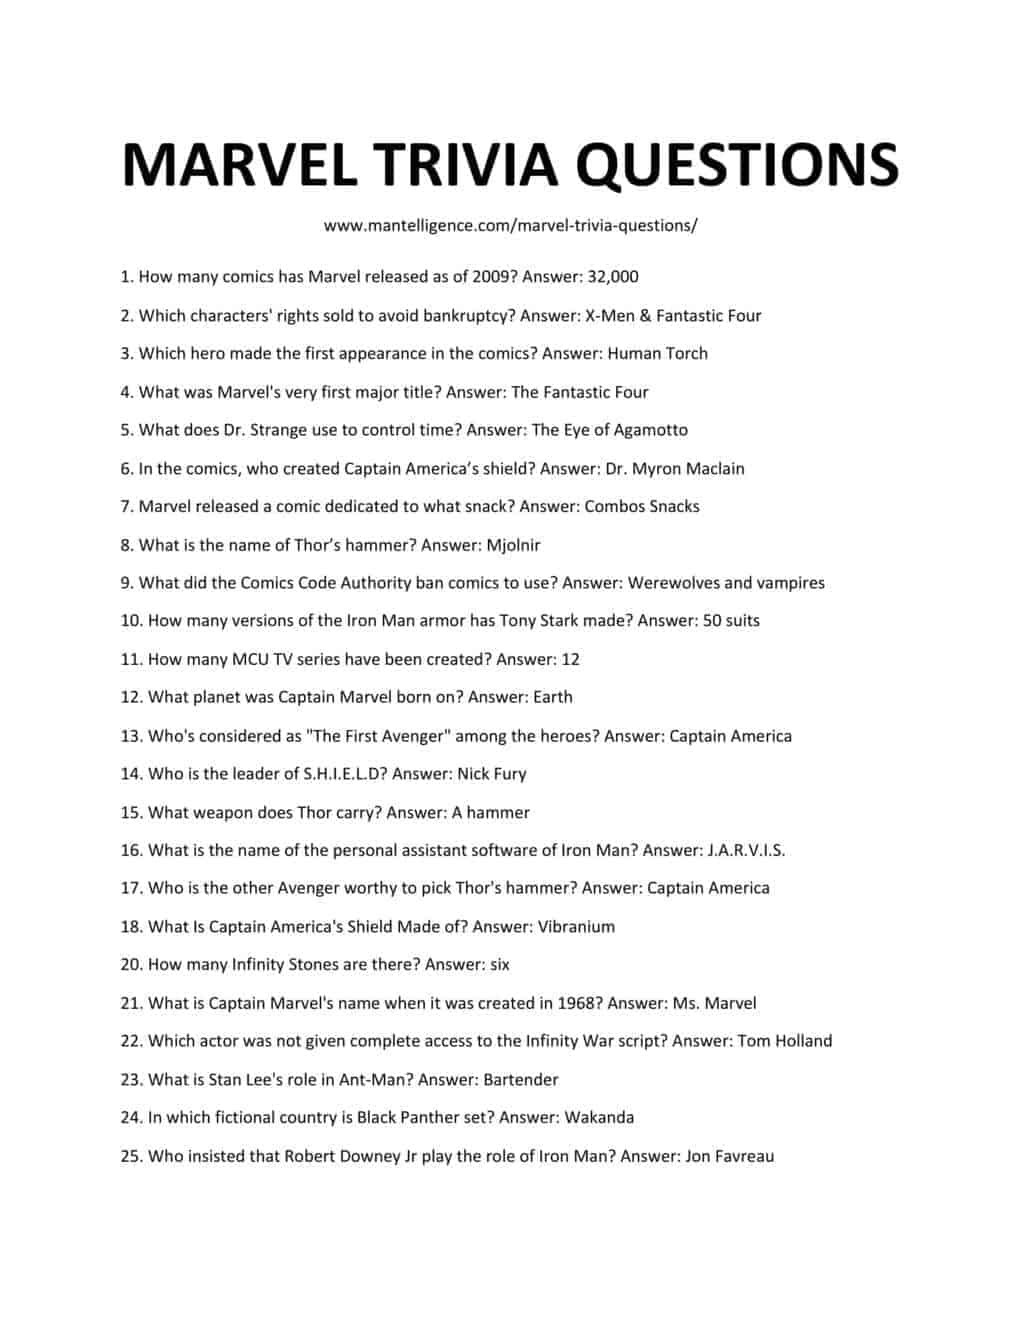 45 Best Marvel Trivia Questions And Answers This Is The List You Need 